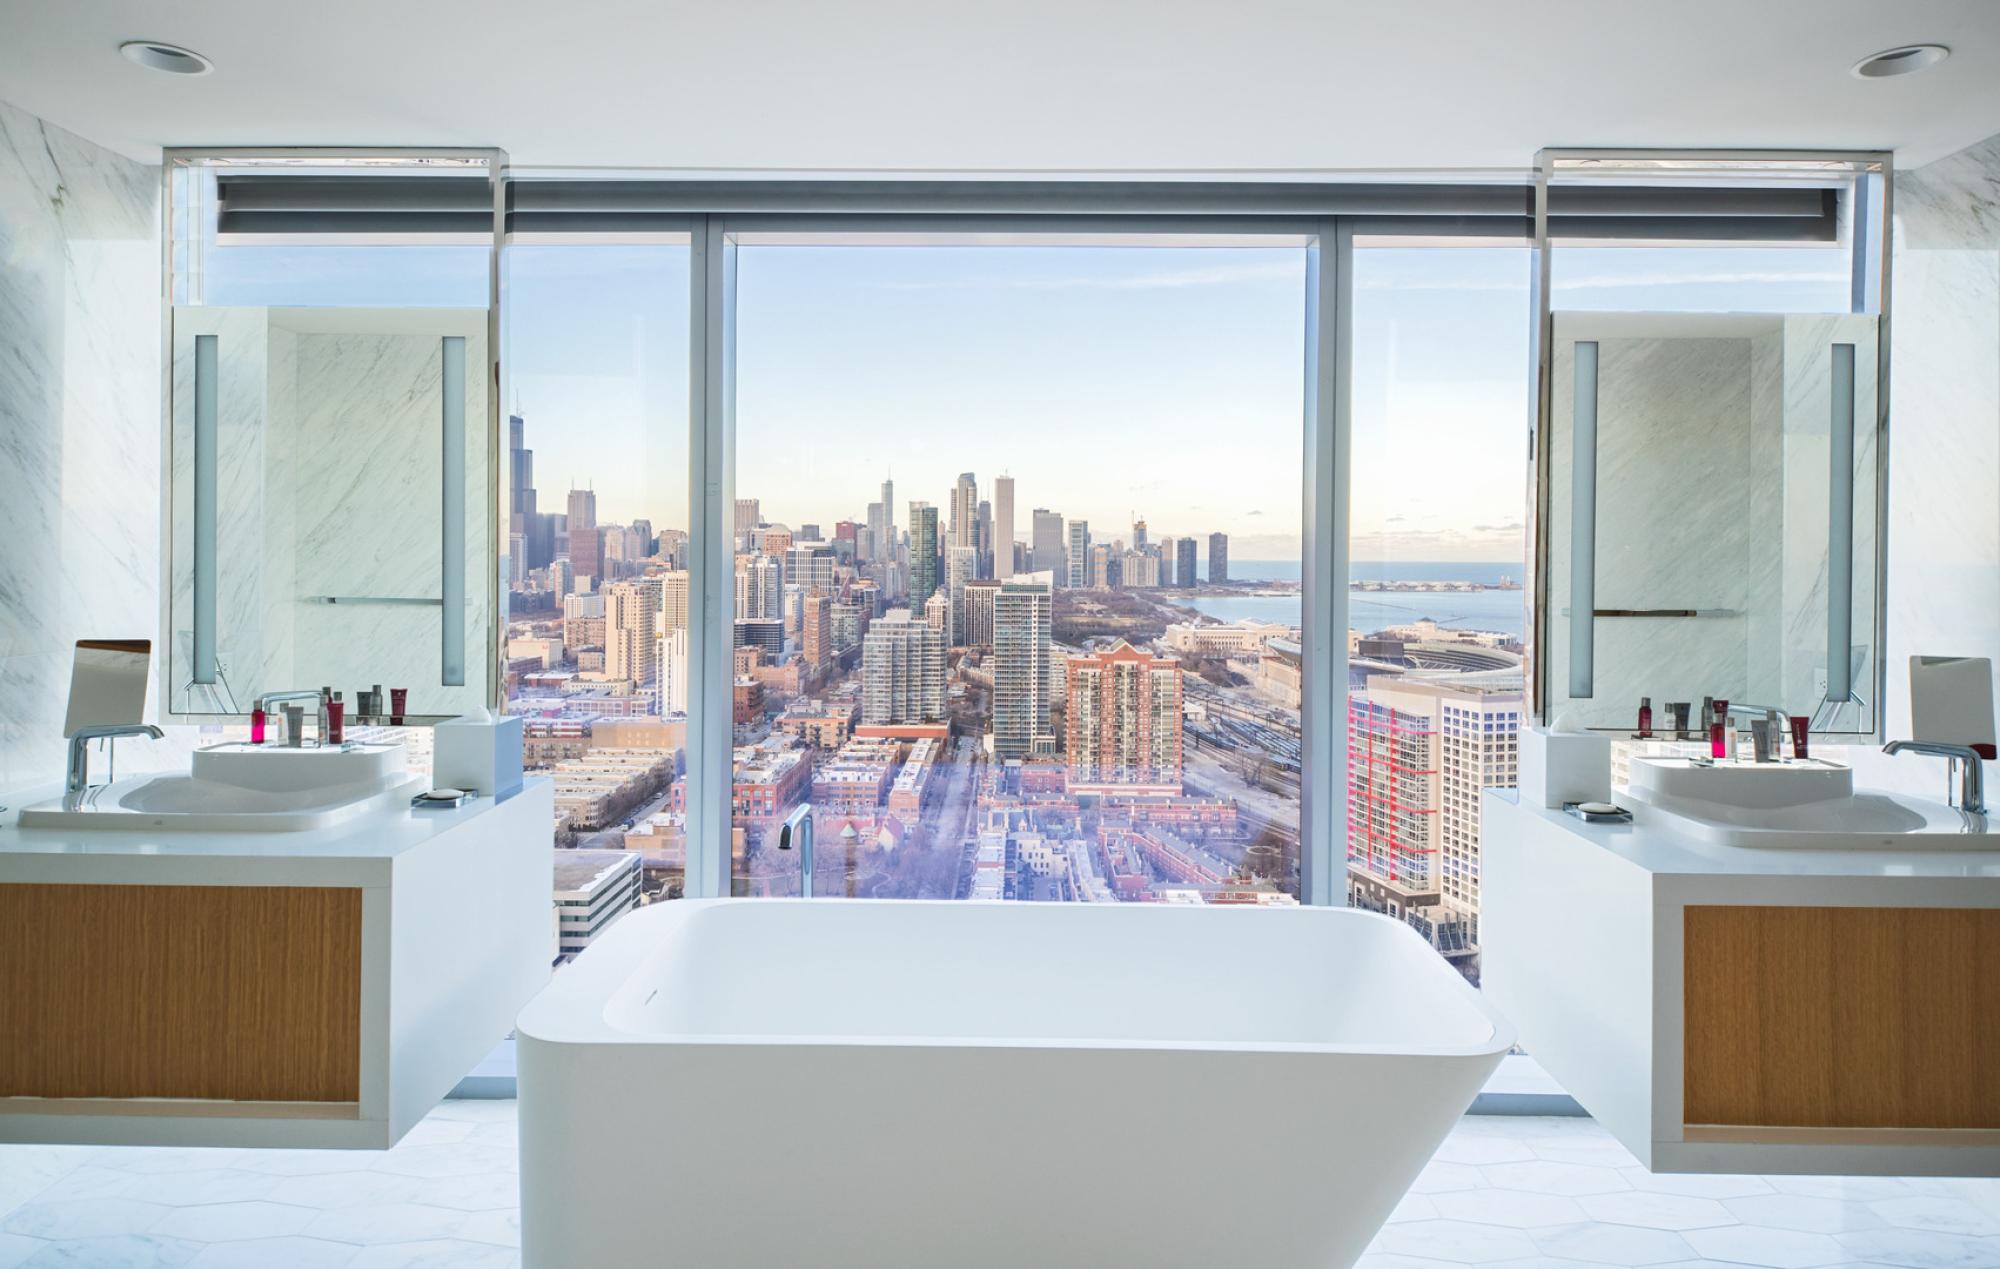 A part of Clark's hospitality portfolio, the presidential bathroom suite includes a freestanding tub with windows overlooking downtown Chicago